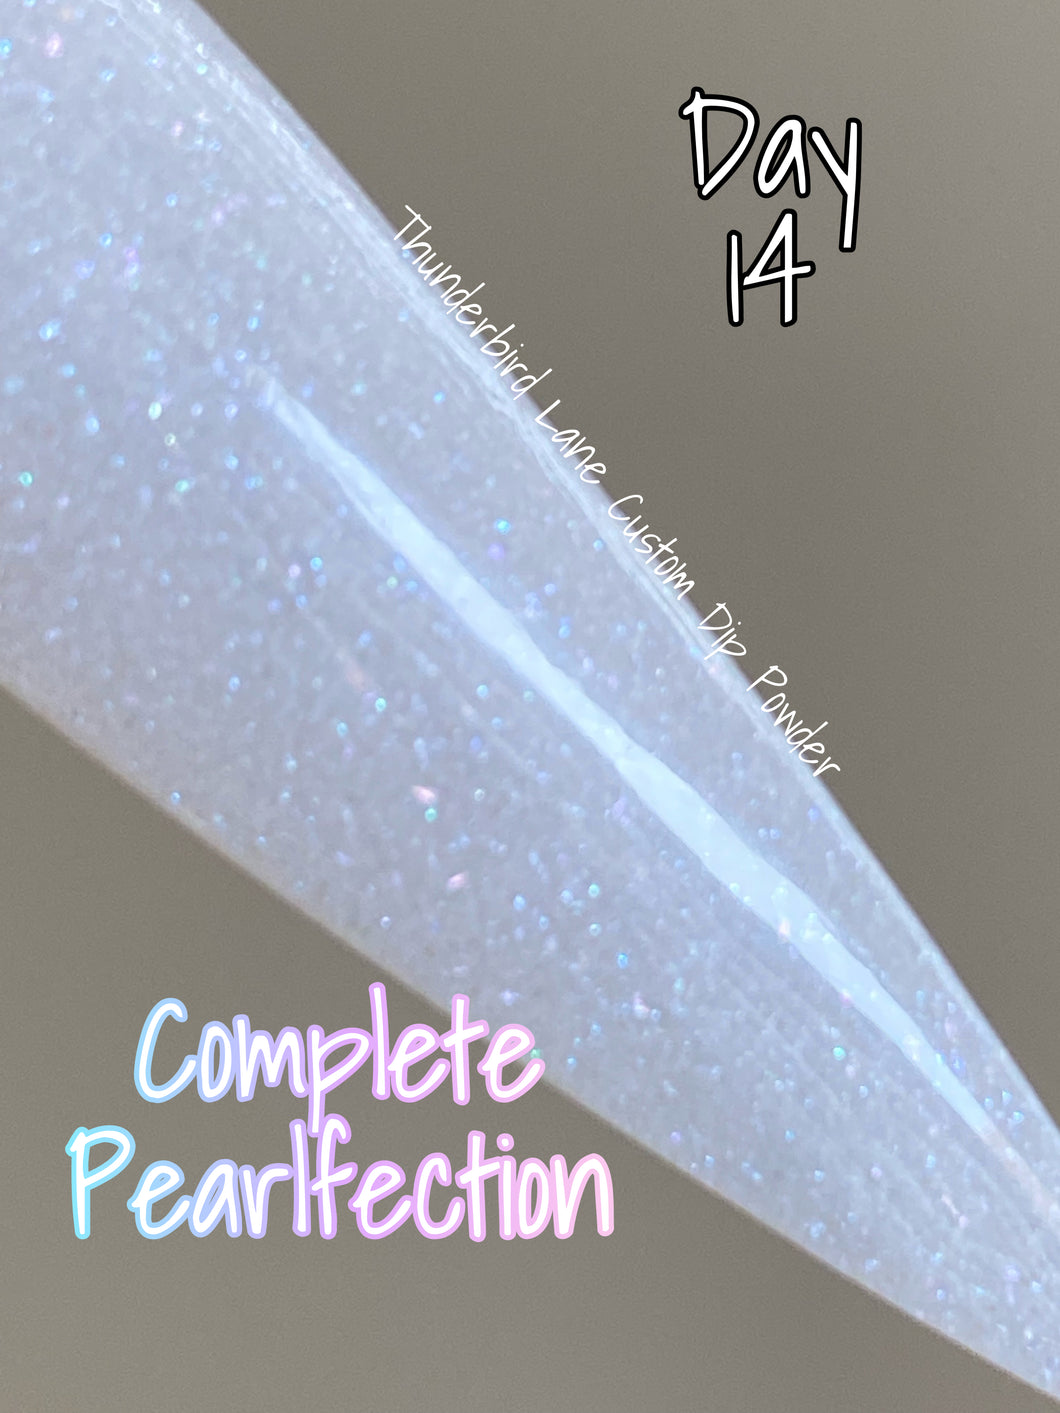 Complete Pearlfection